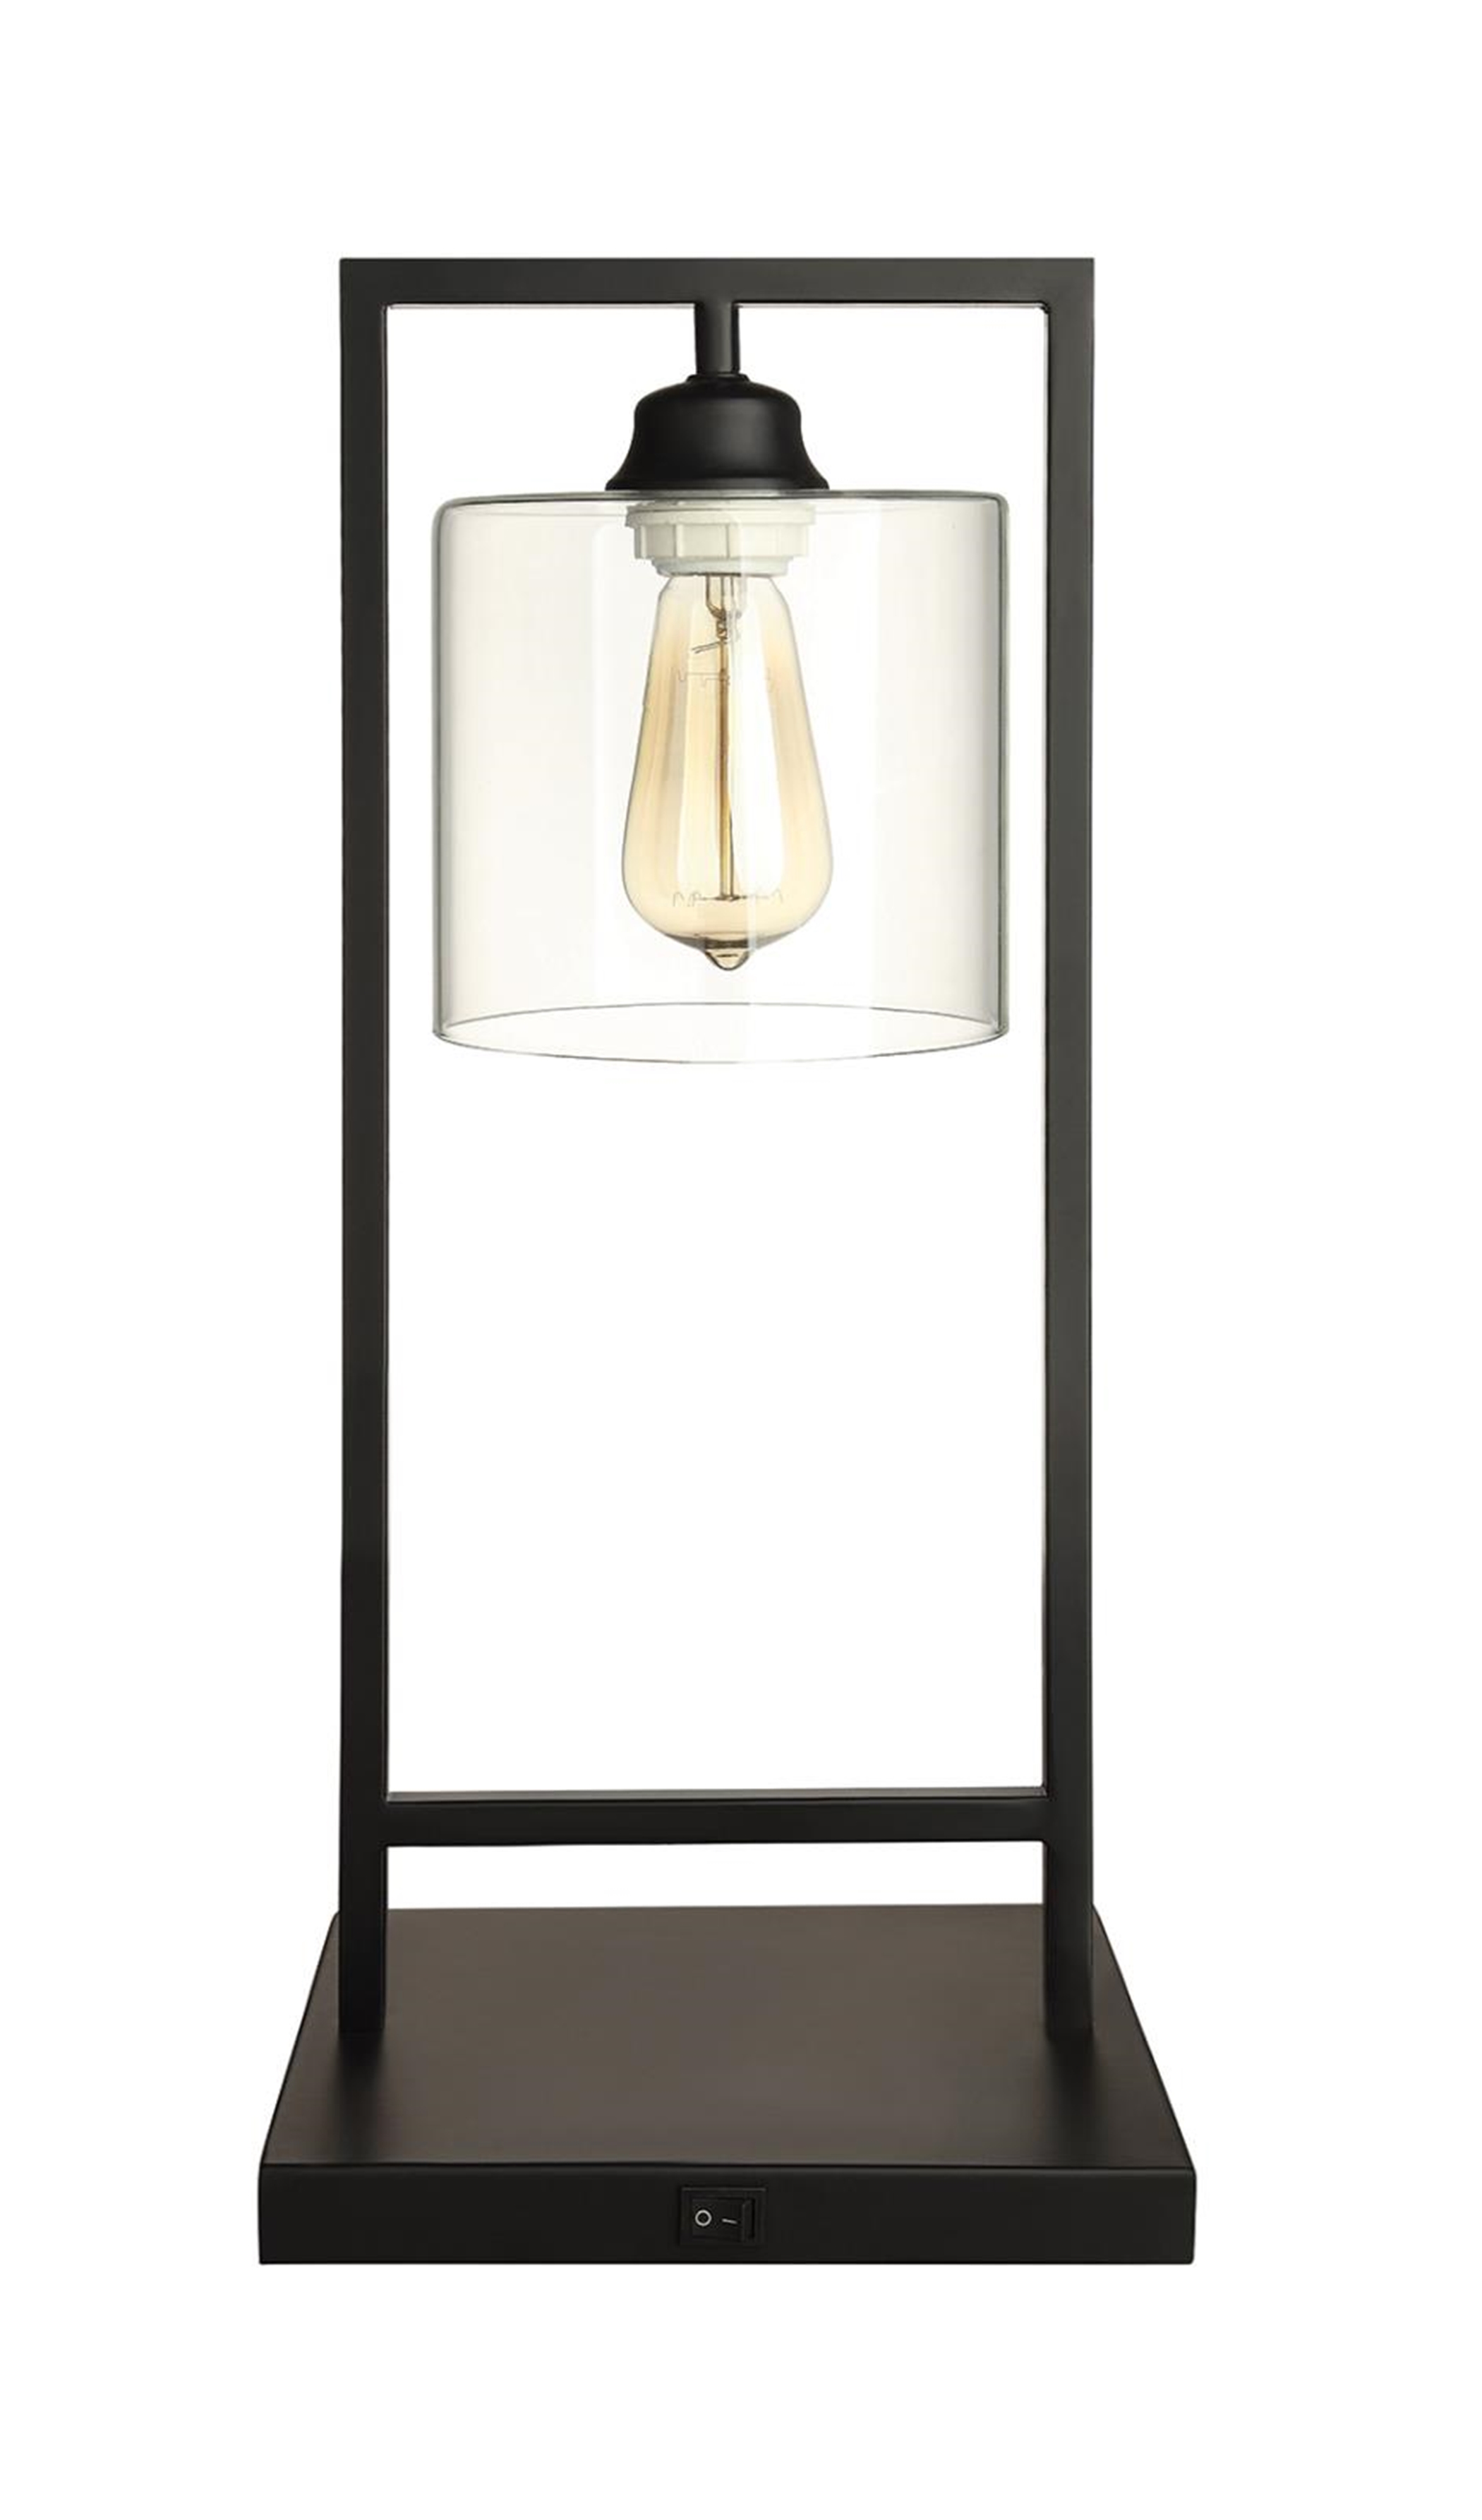 Transitional Black Table Lamp